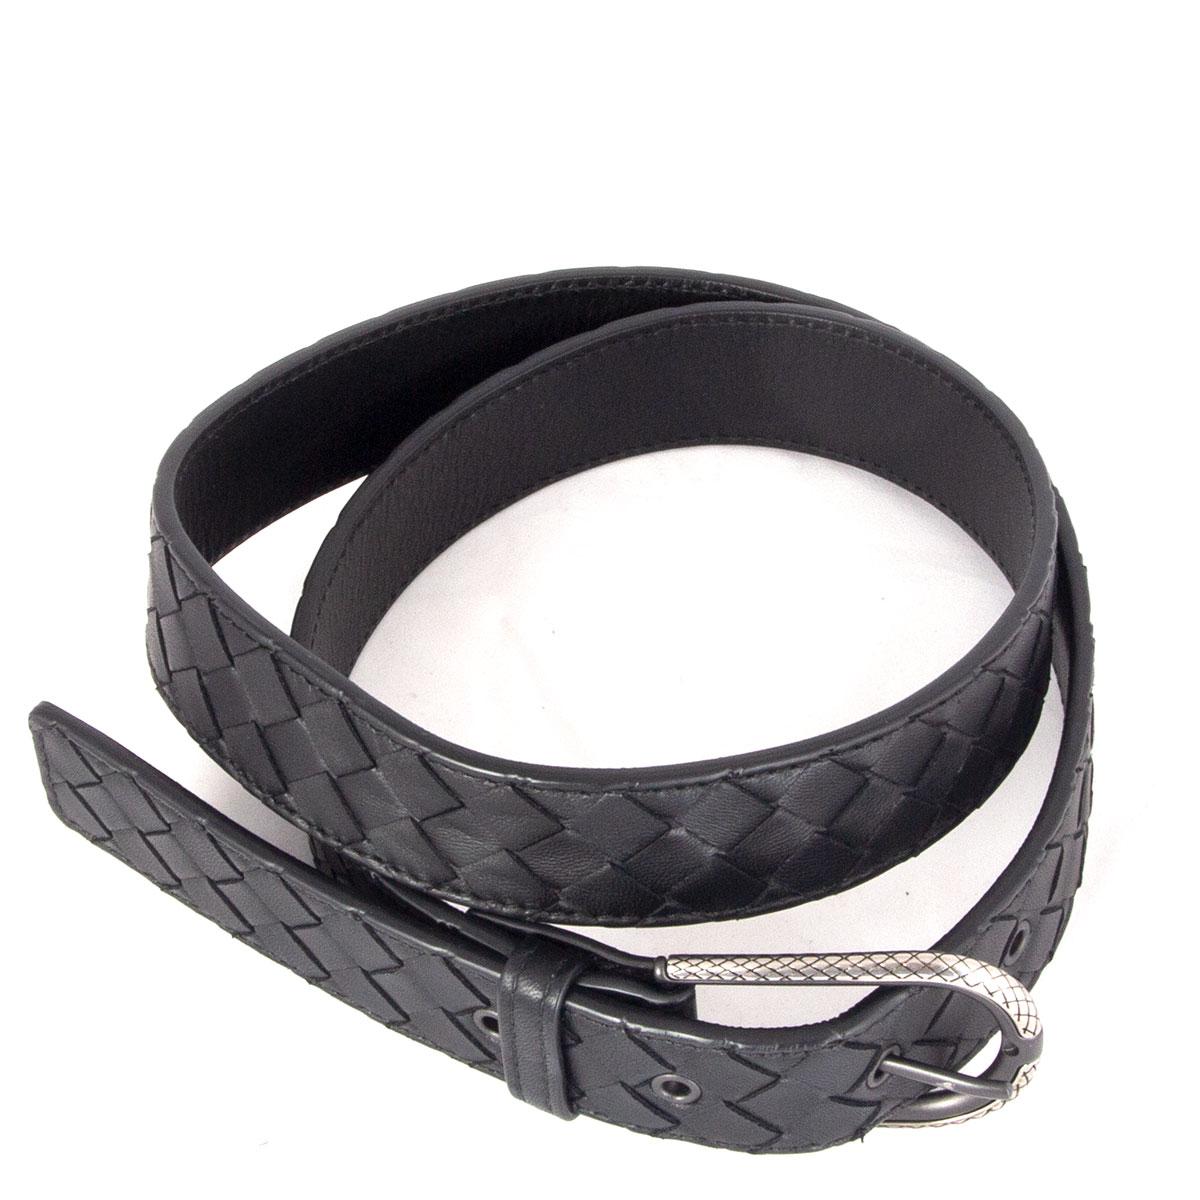 100% authentic Bottega Veneta Intrecciato belt in black woven leather featuring silver-tone buckle. Has been worn and is in excellent condition. 

Measurements
Tag Size	85
Size	85cm (33.2in)
Width	3cm (1.2in)
Fits	75cm (29.3in) to 87cm